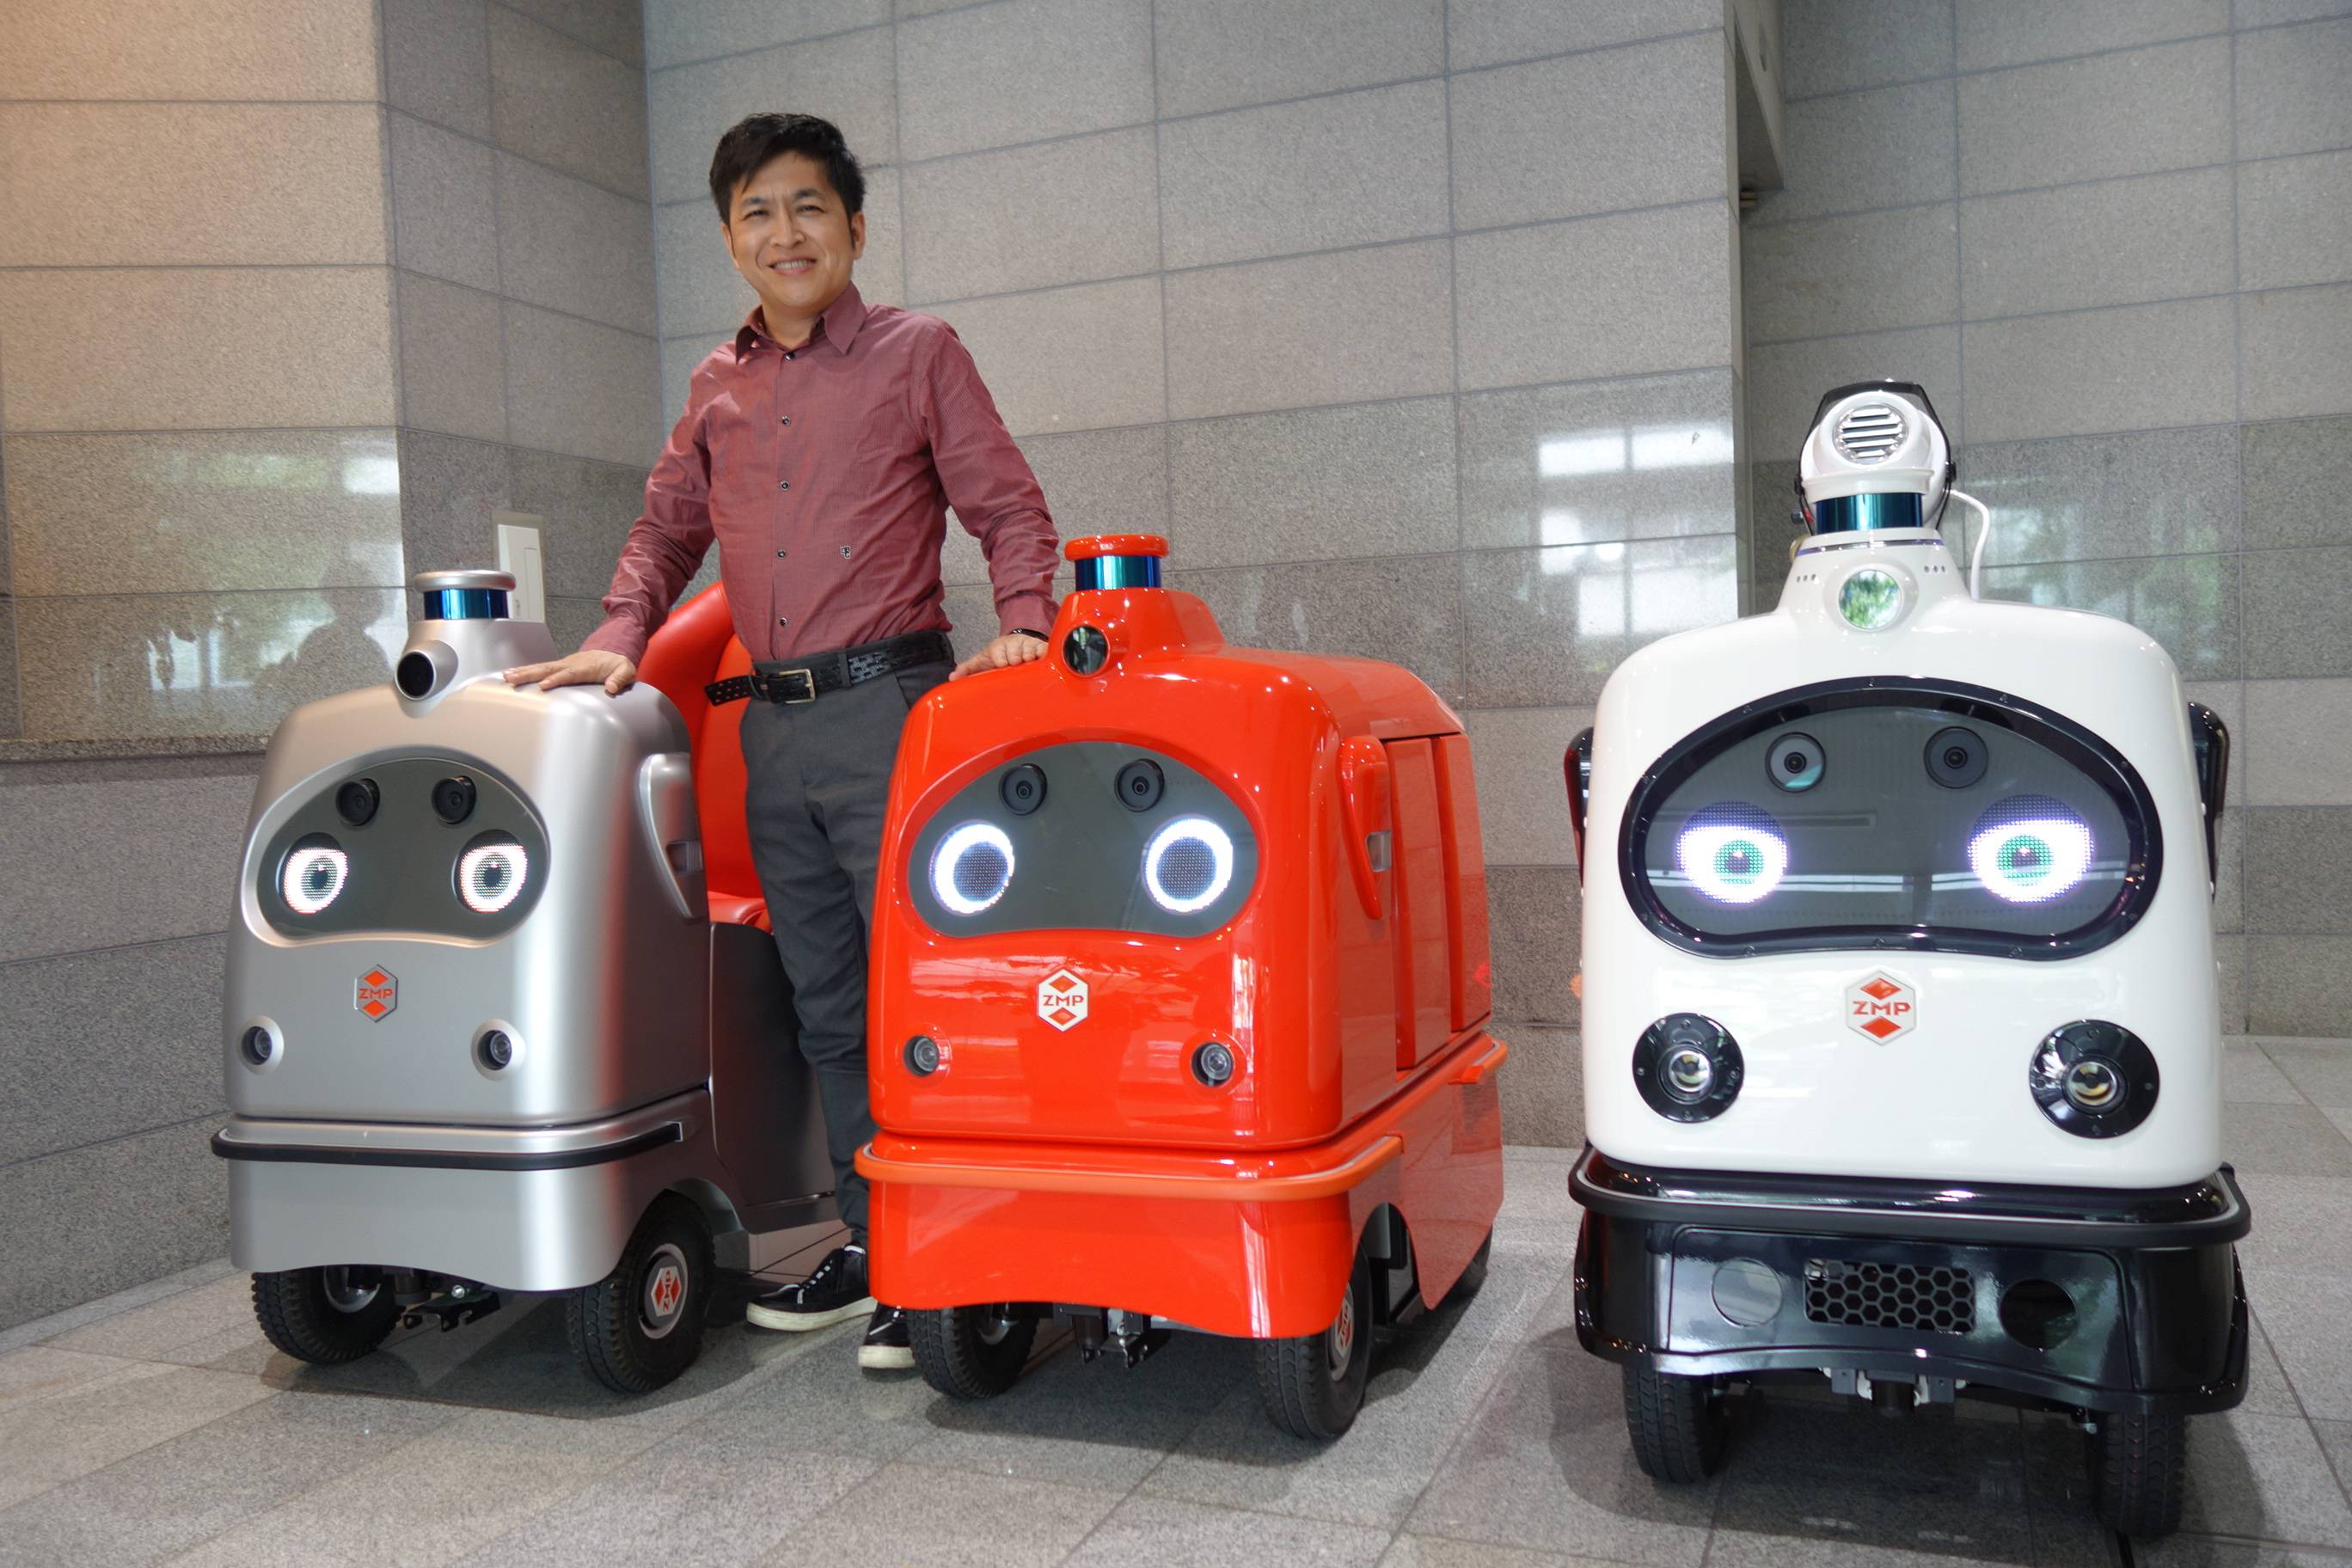 Hisashi Taniguchi, CEO of ZMP Inc., stands with the service robots his company has produced at its headquarters in Bunkyo Ward. | ALEX MARTIN